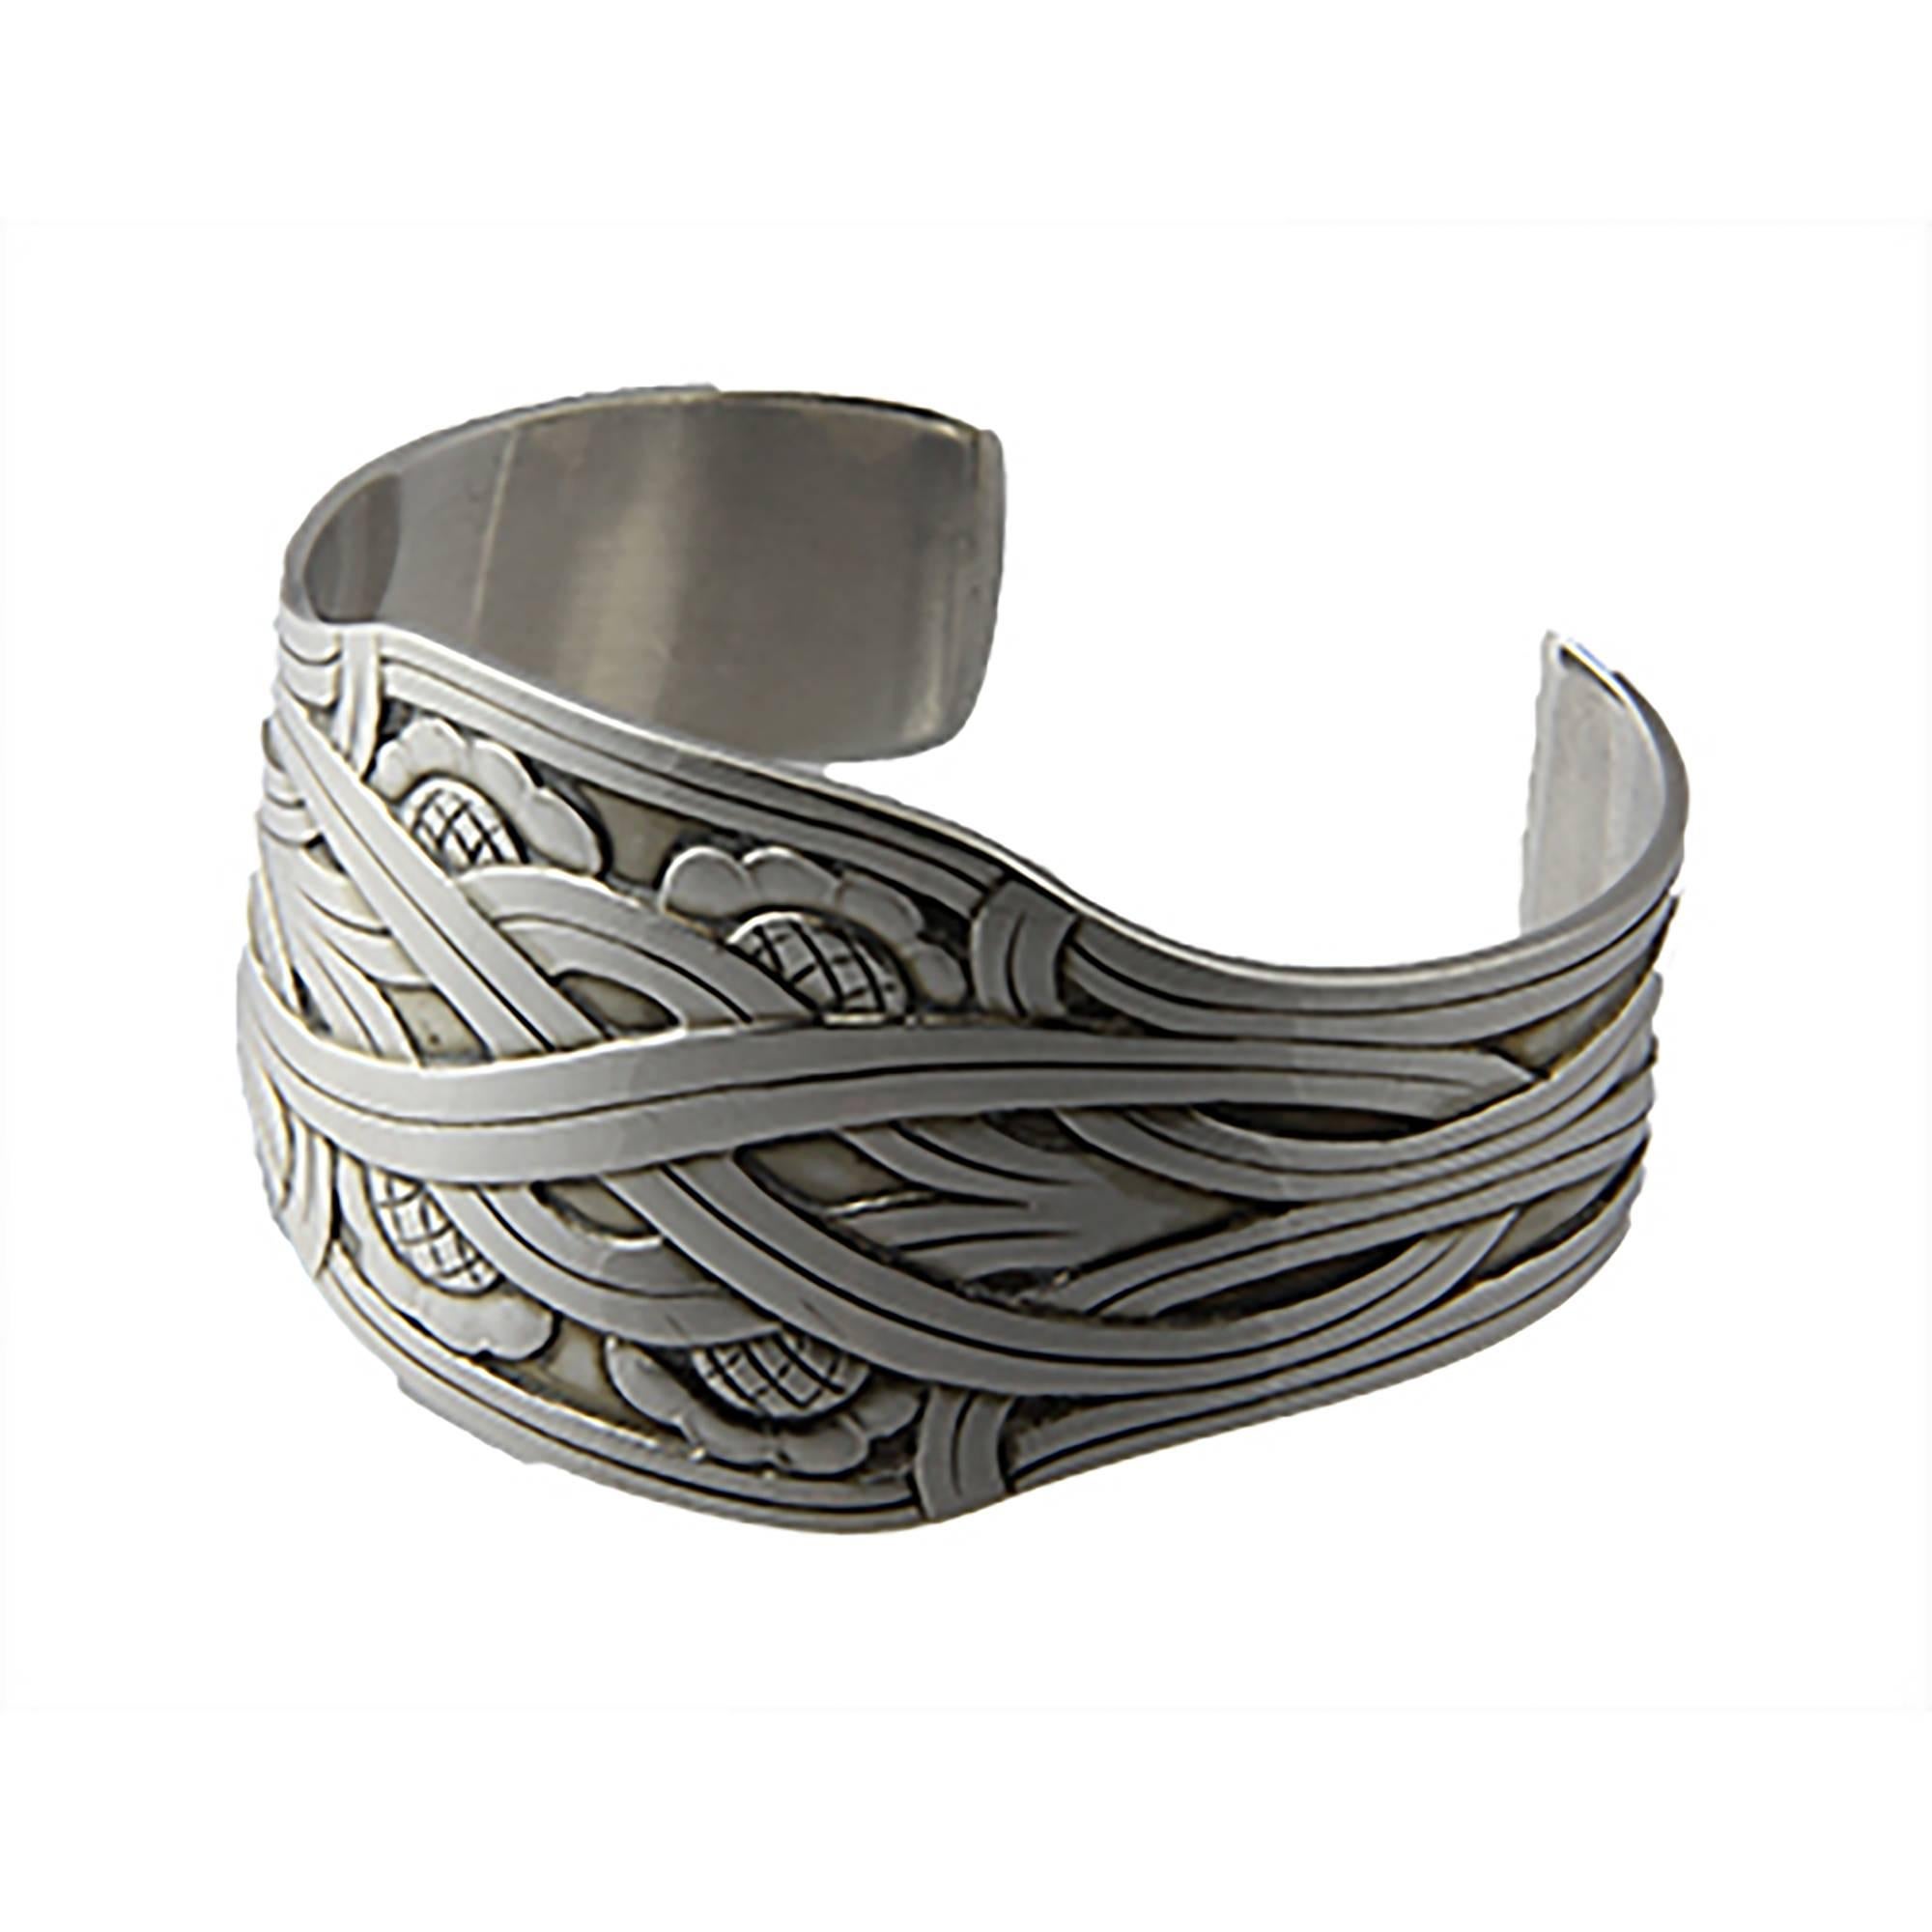 Sterling silver Georg Jensen cuff bracelet was designed in 1935 by Harald Nielsen. His designs are characterized by an emphasis on form and line, with a minimum of ornamentation. A similar example of the design can be found on p. 264 in the book,